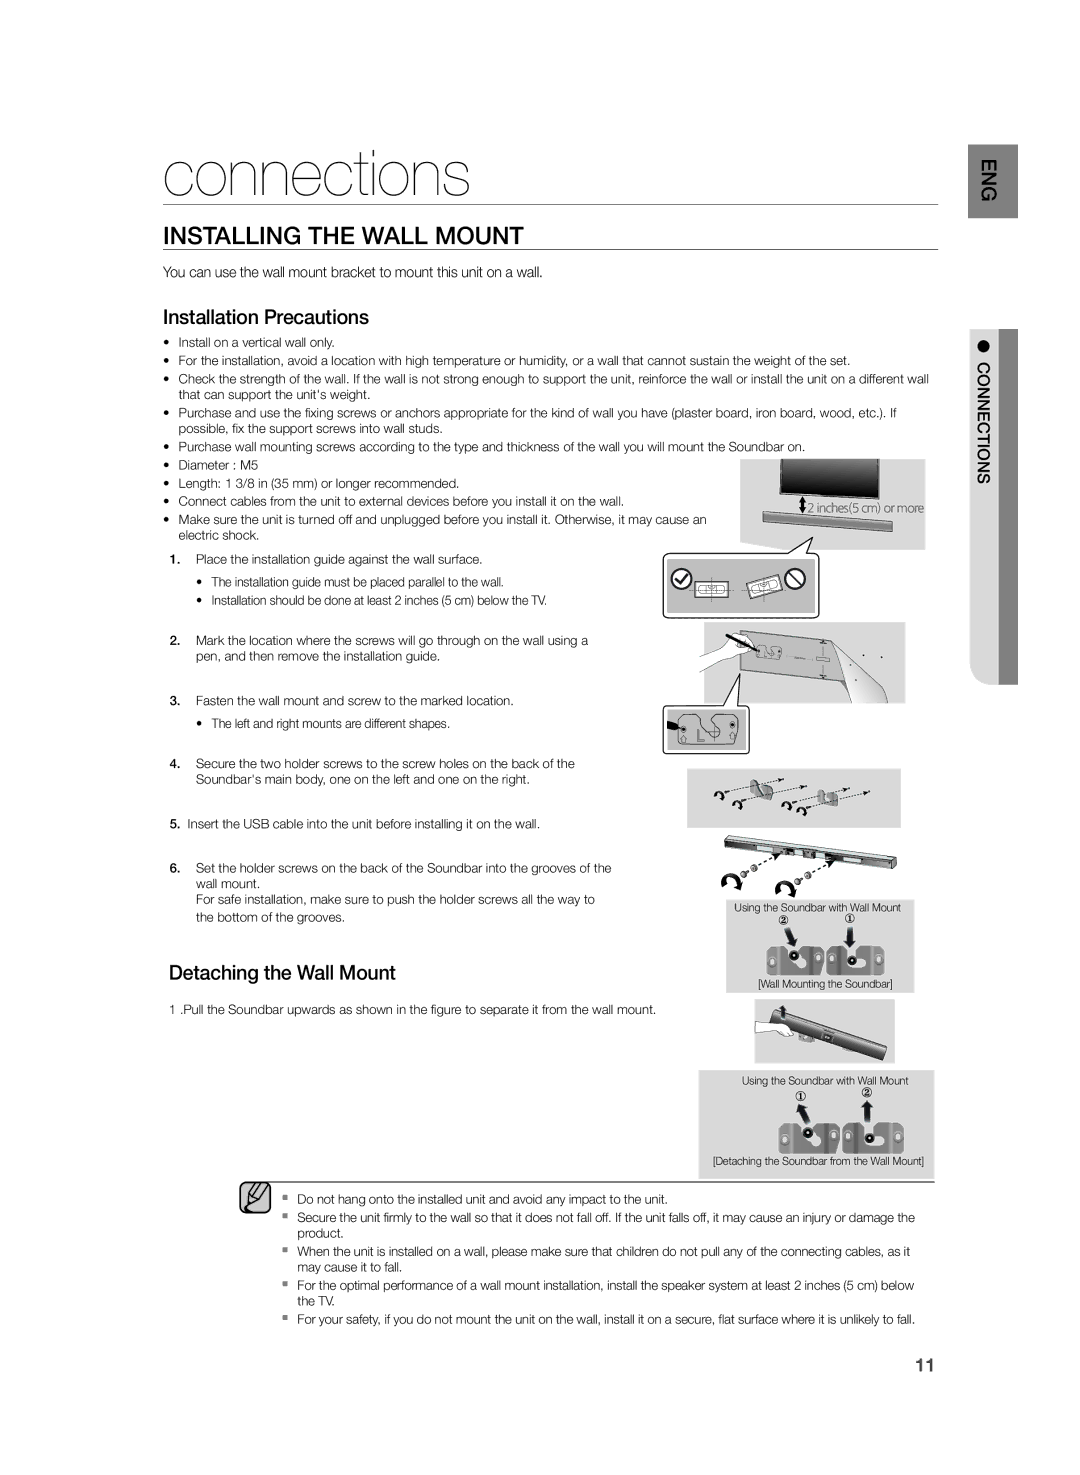 Samsung HW-H355/XE manual Connections, Installing the Wall Mount 